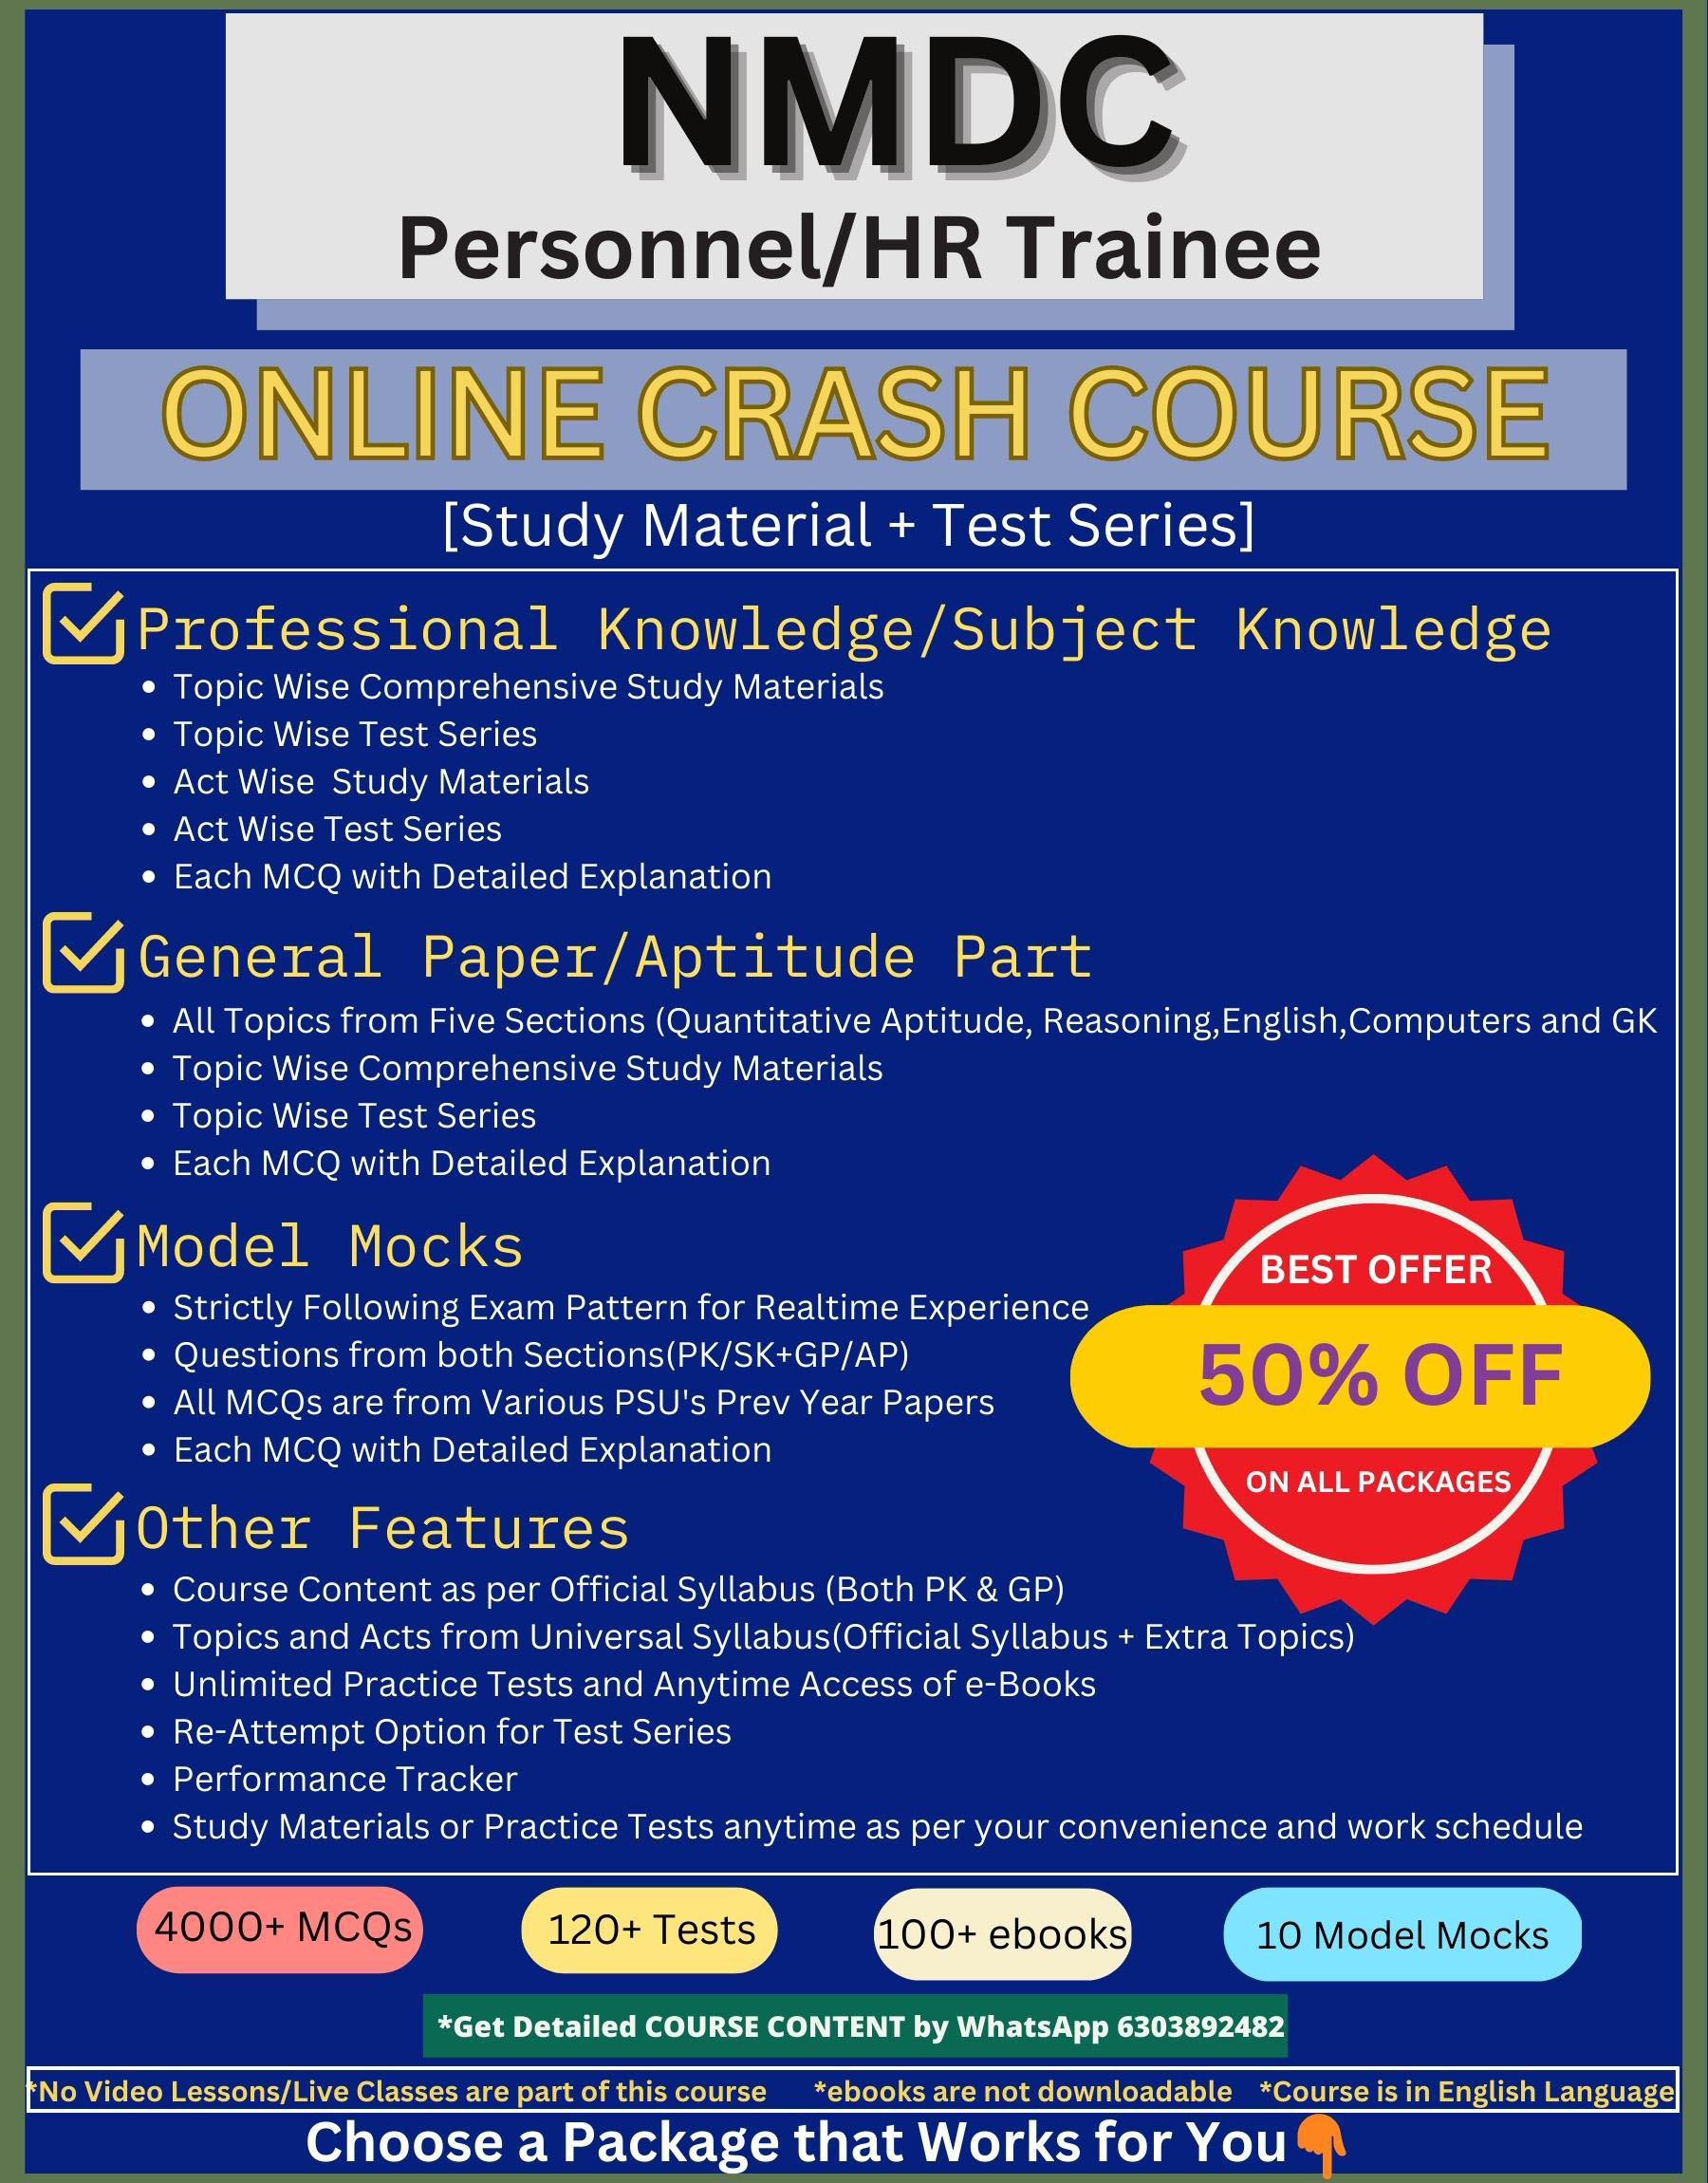 Online course with test series and study materials for nmdc administrative officer personnel traine